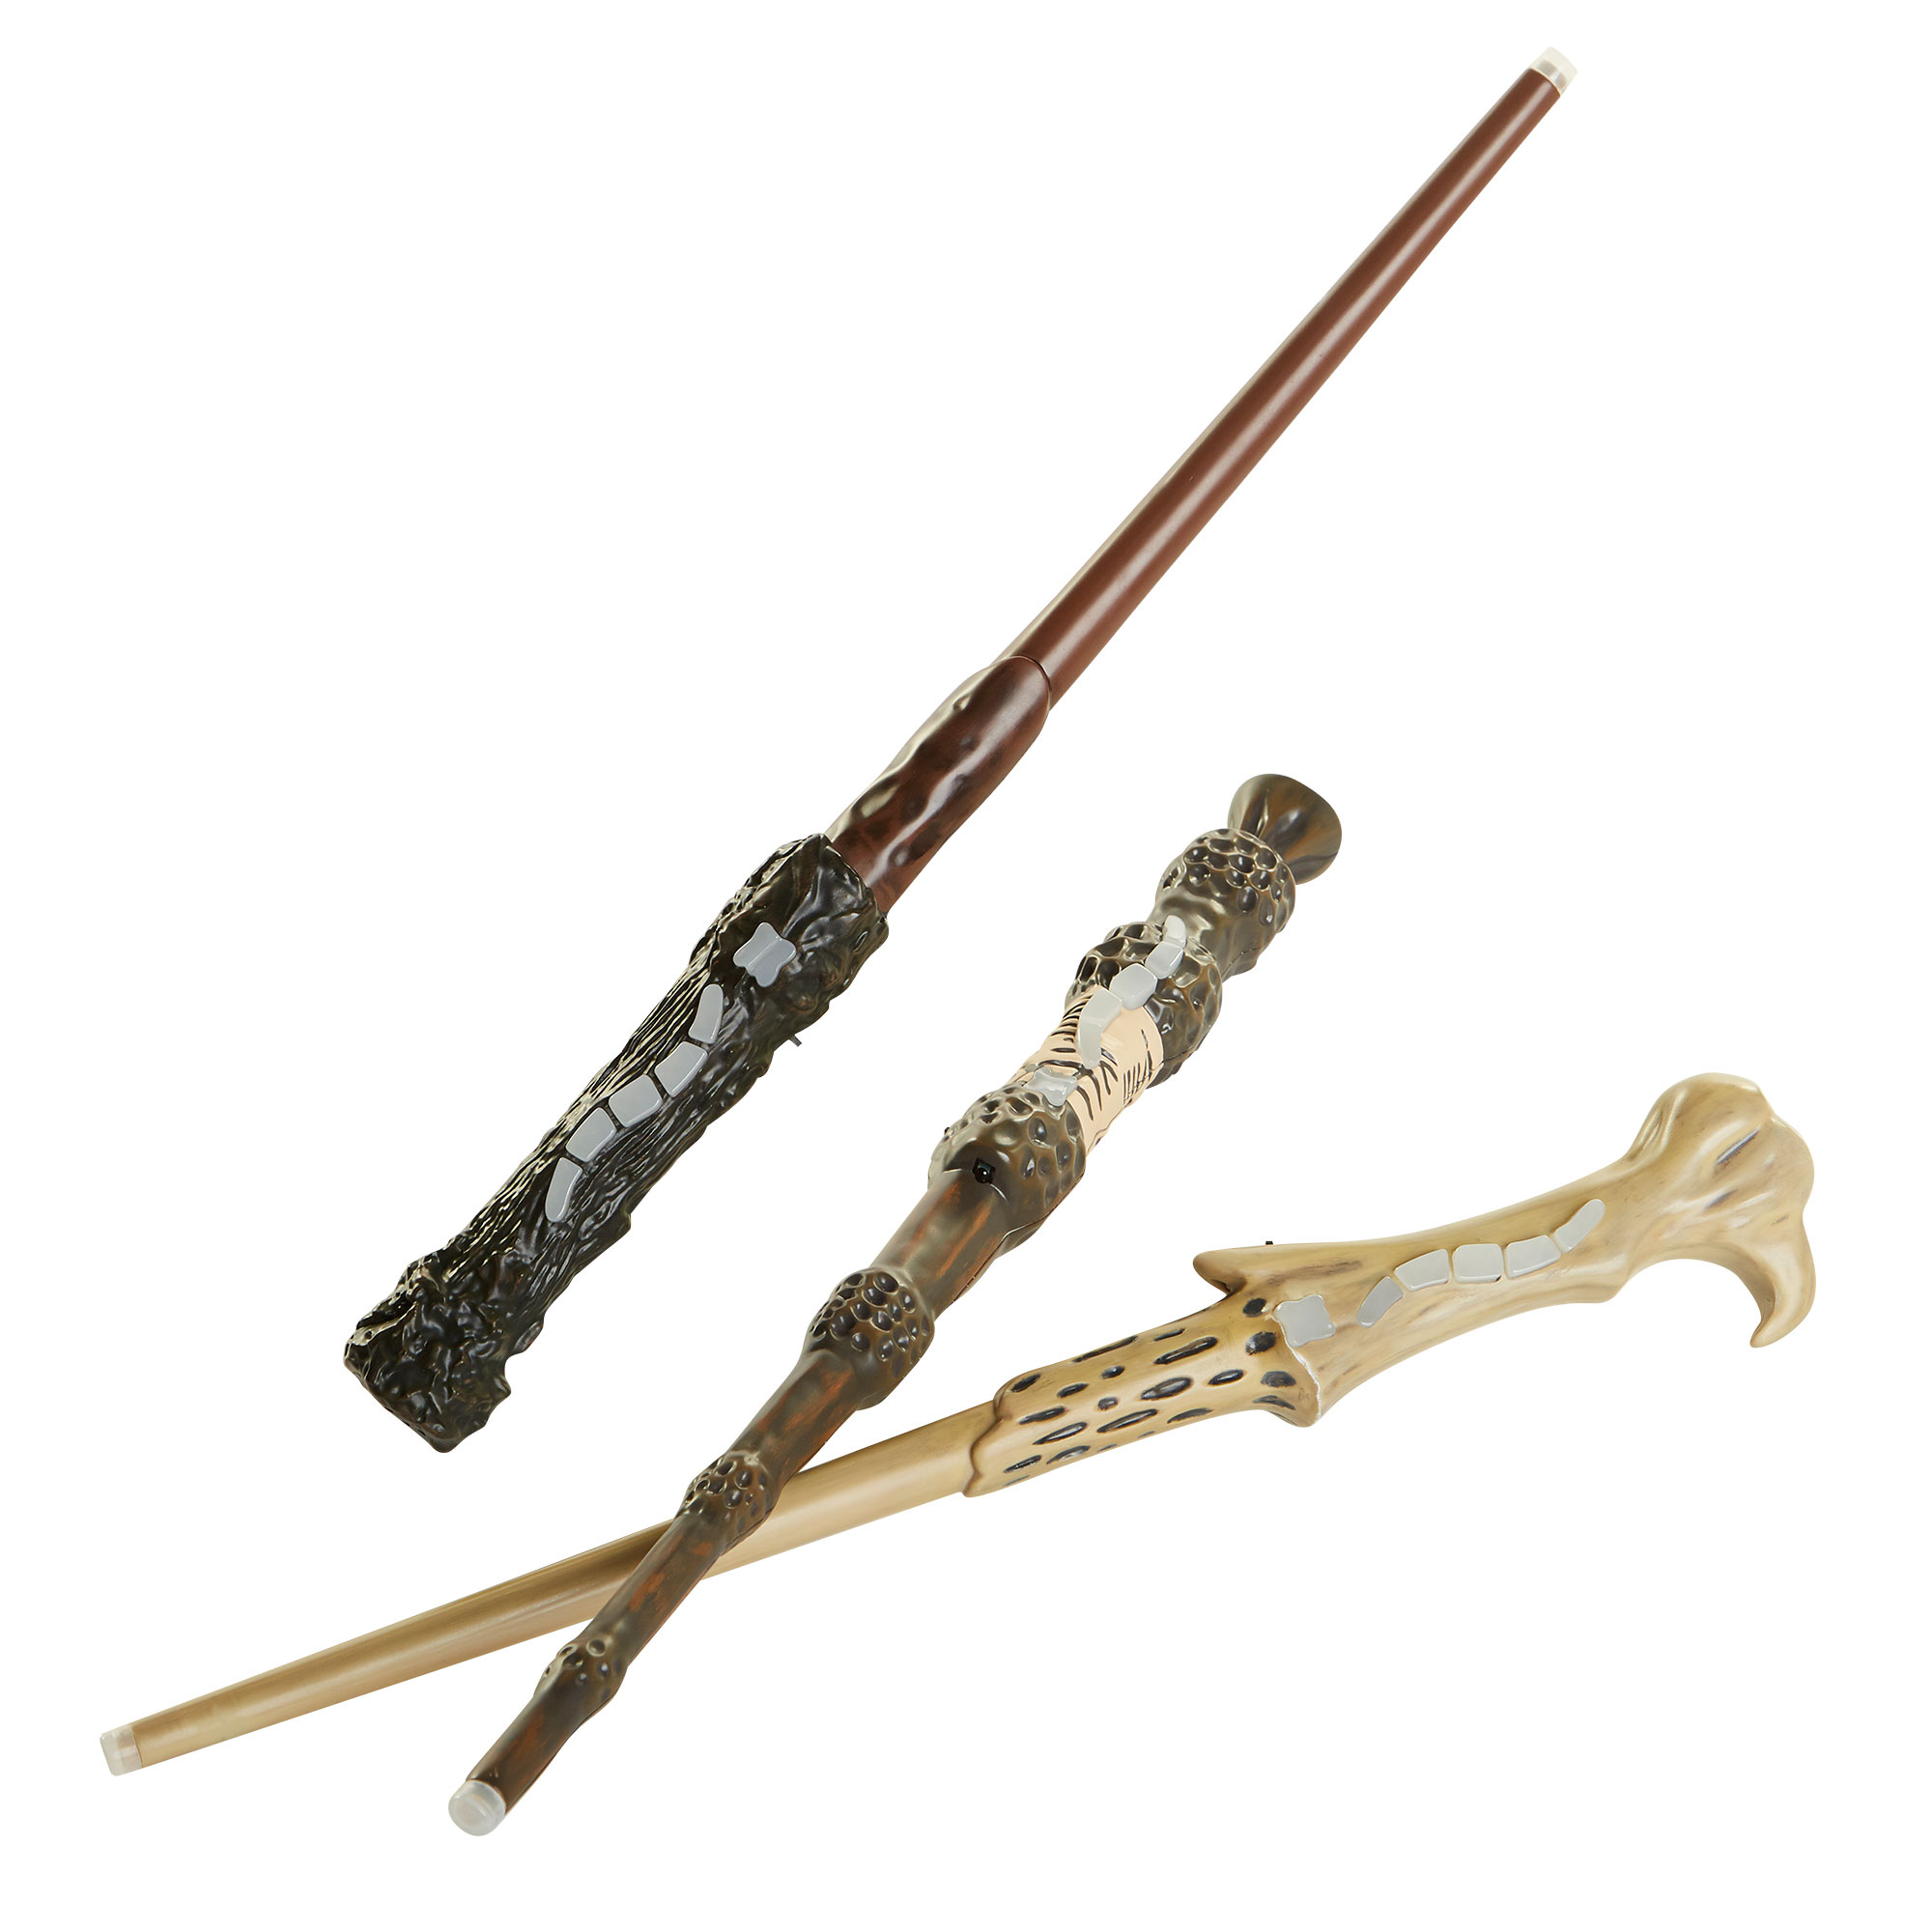 Harry Potter, Albus Dumbledore, and Lord Voldemort Wizard Training Wands from Jakks Toys